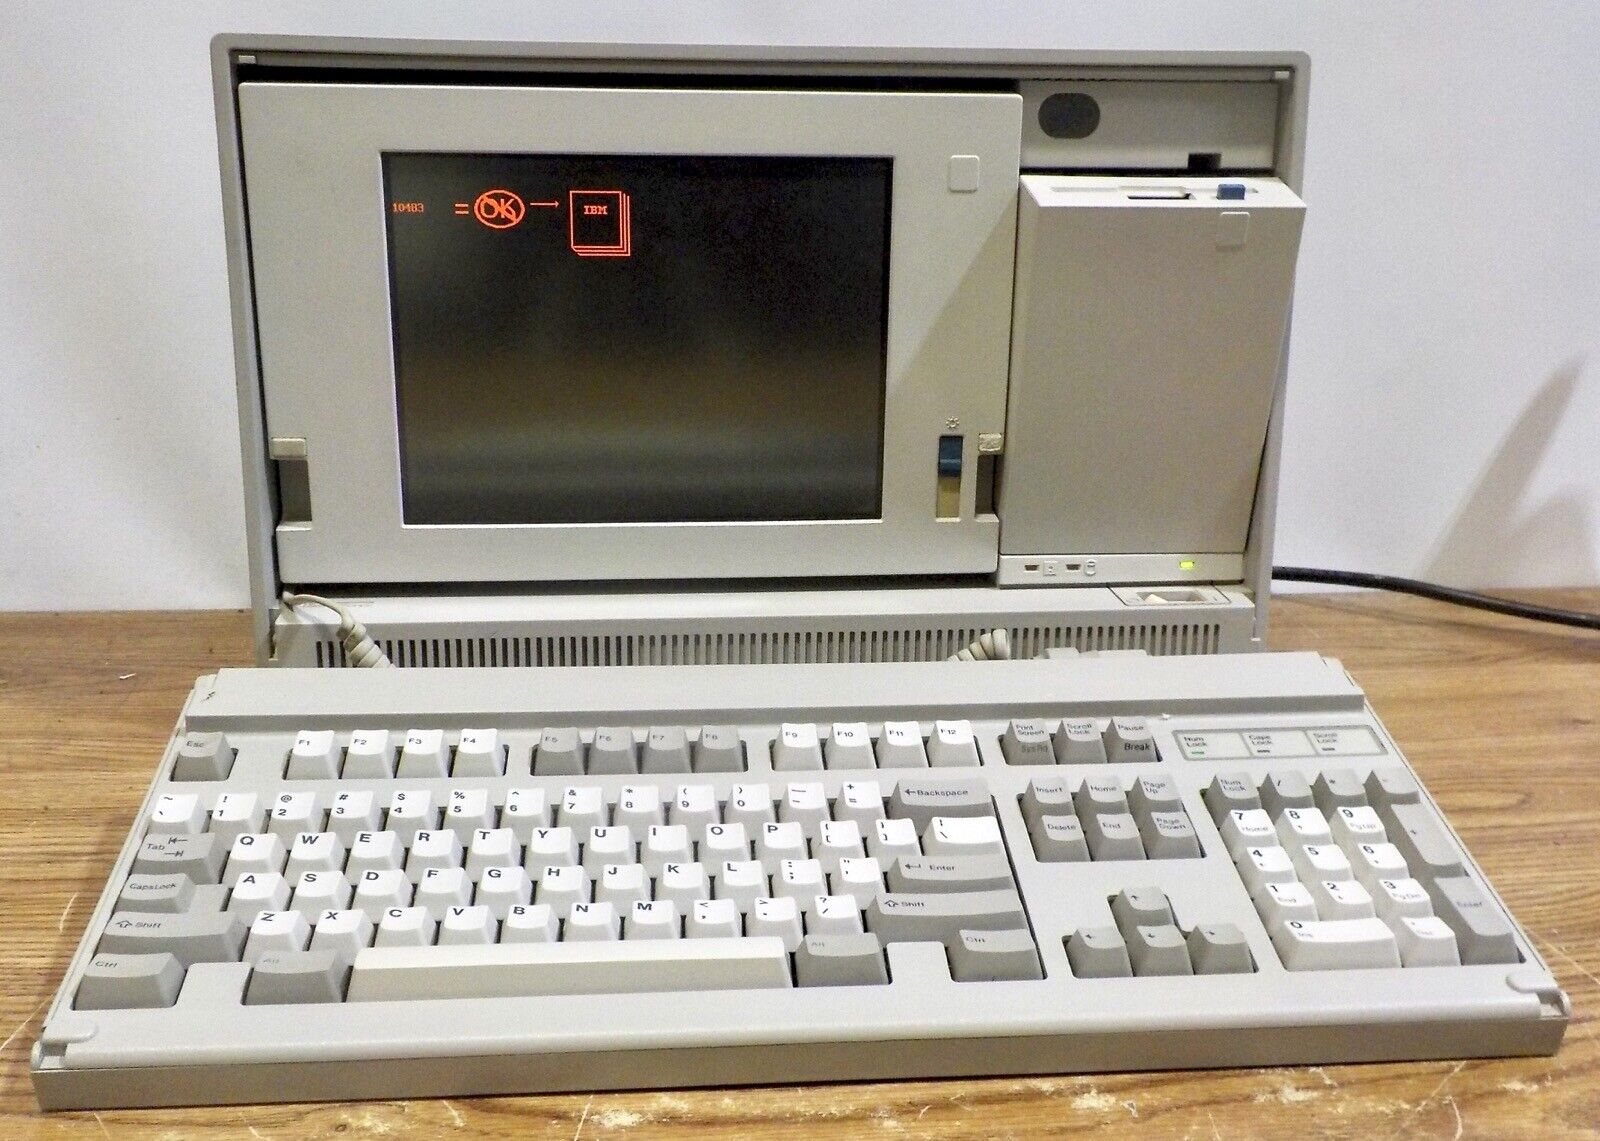 IBM Personal System/2 P70 386 Portable Computer - Type 8573-121 P/N 65X1580